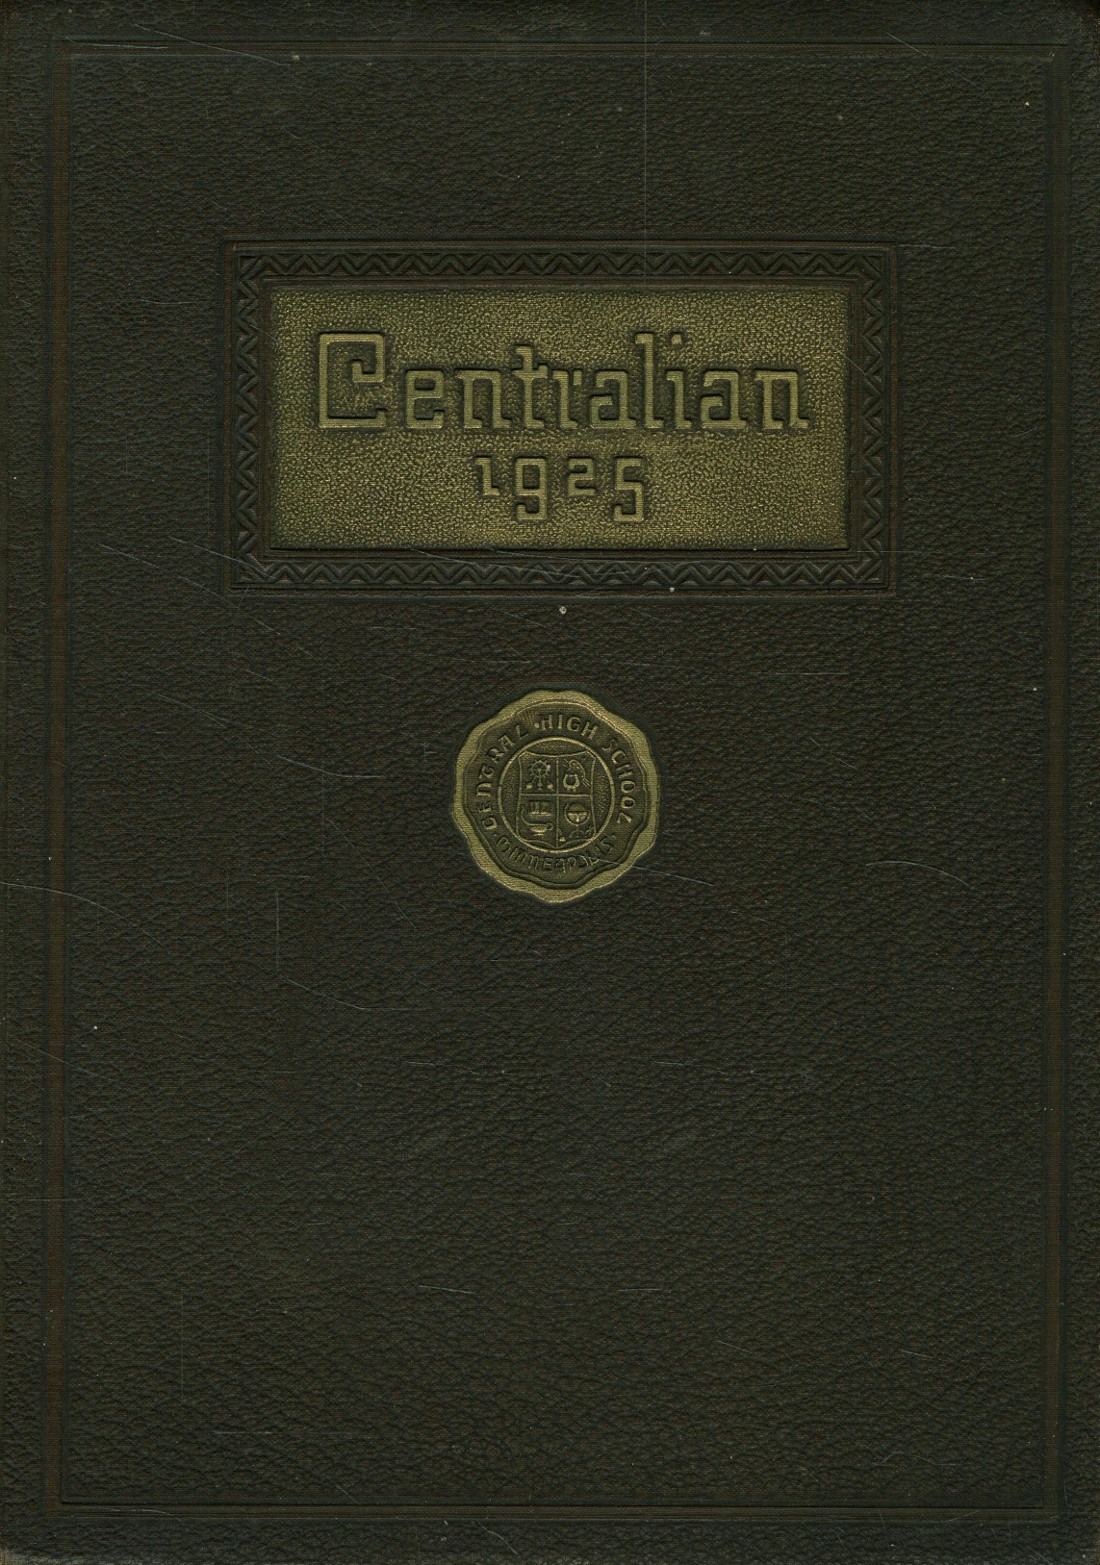 1925 yearbook from Central High School from Minneapolis, Minnesota for sale